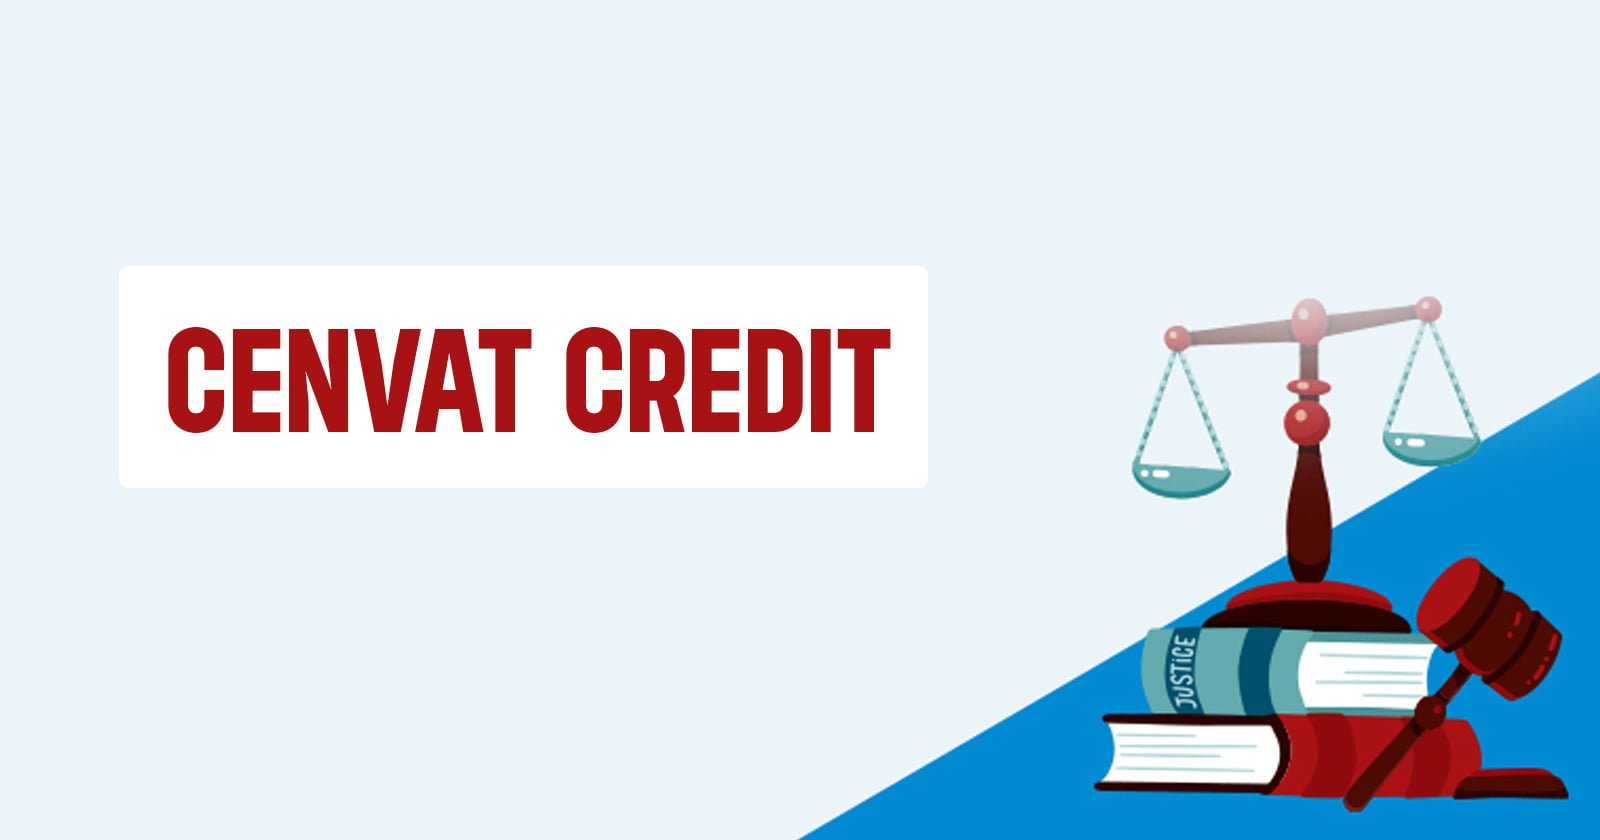 Non-Utilised portion of Cenvat Credit - Non-Utilised portion - Cenvat Credit - Refund in cash - Refund - CESTAT - Customs - Excise - Service Tax - Taxscan